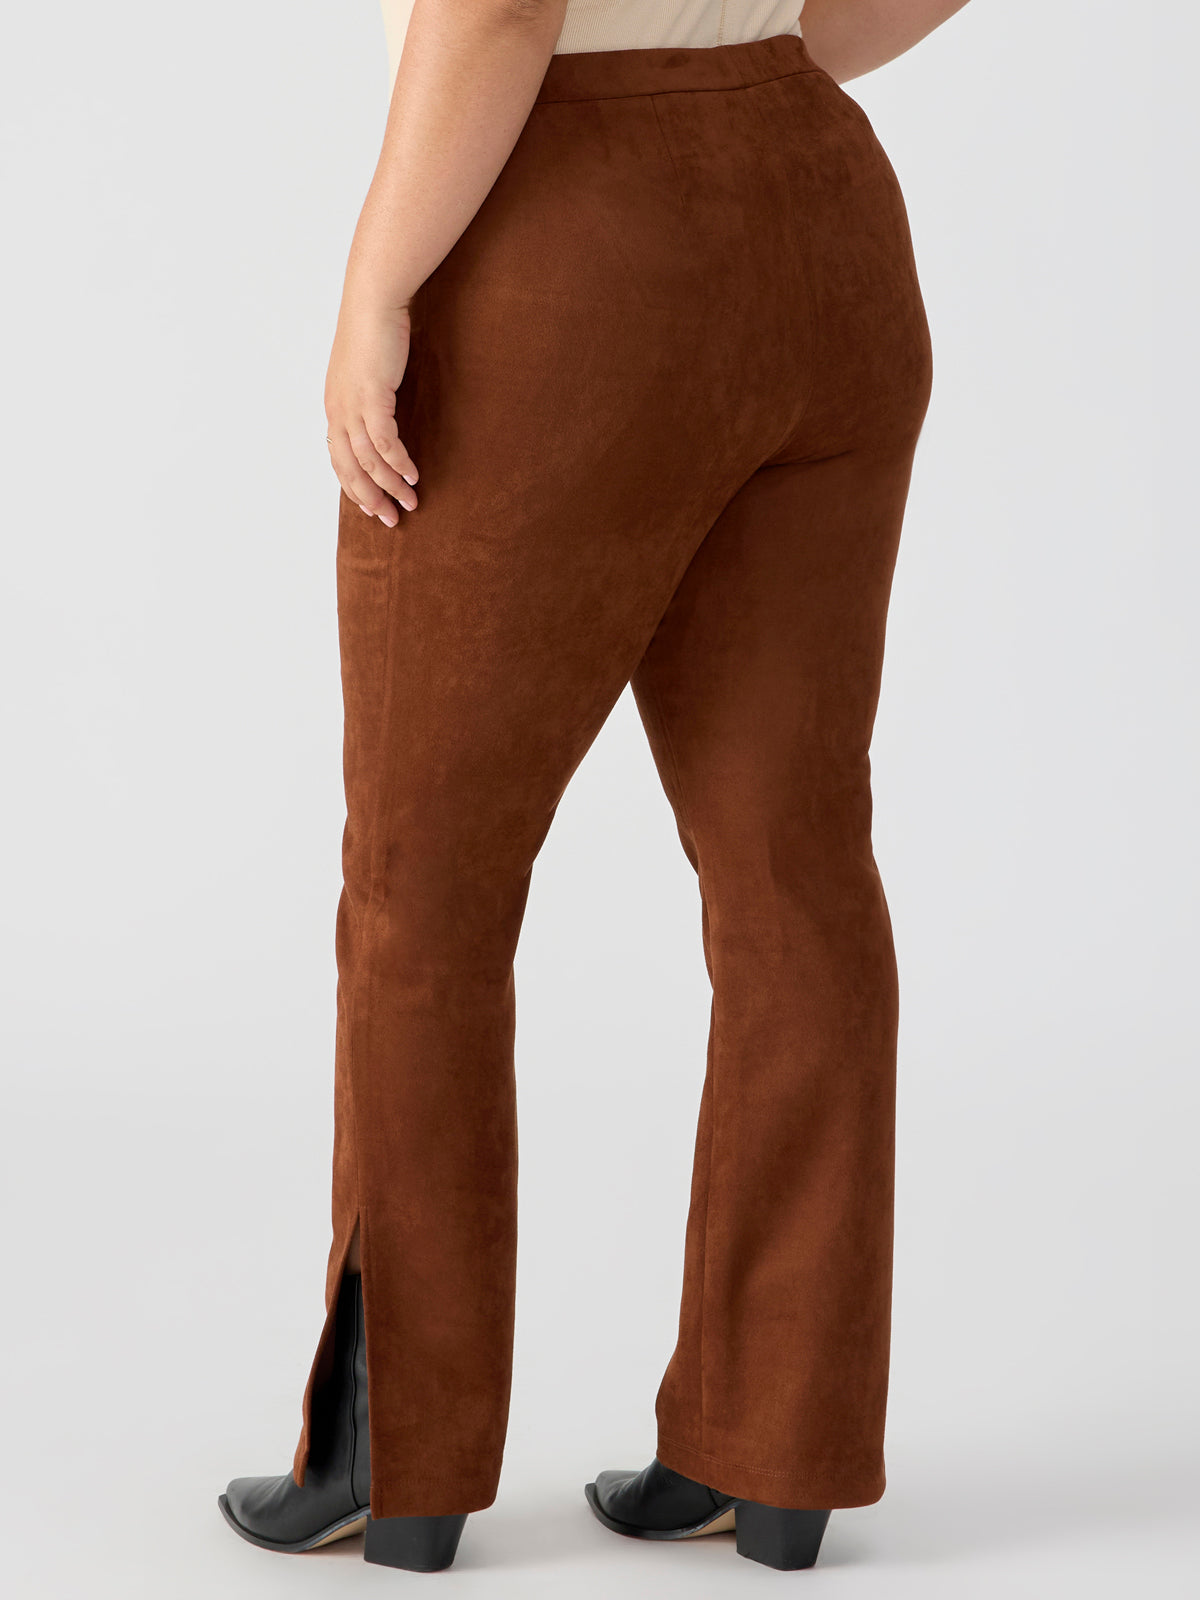 Abbey Faux Suede Semi High Rise Legging Caramel Cafe Inclusive Collection